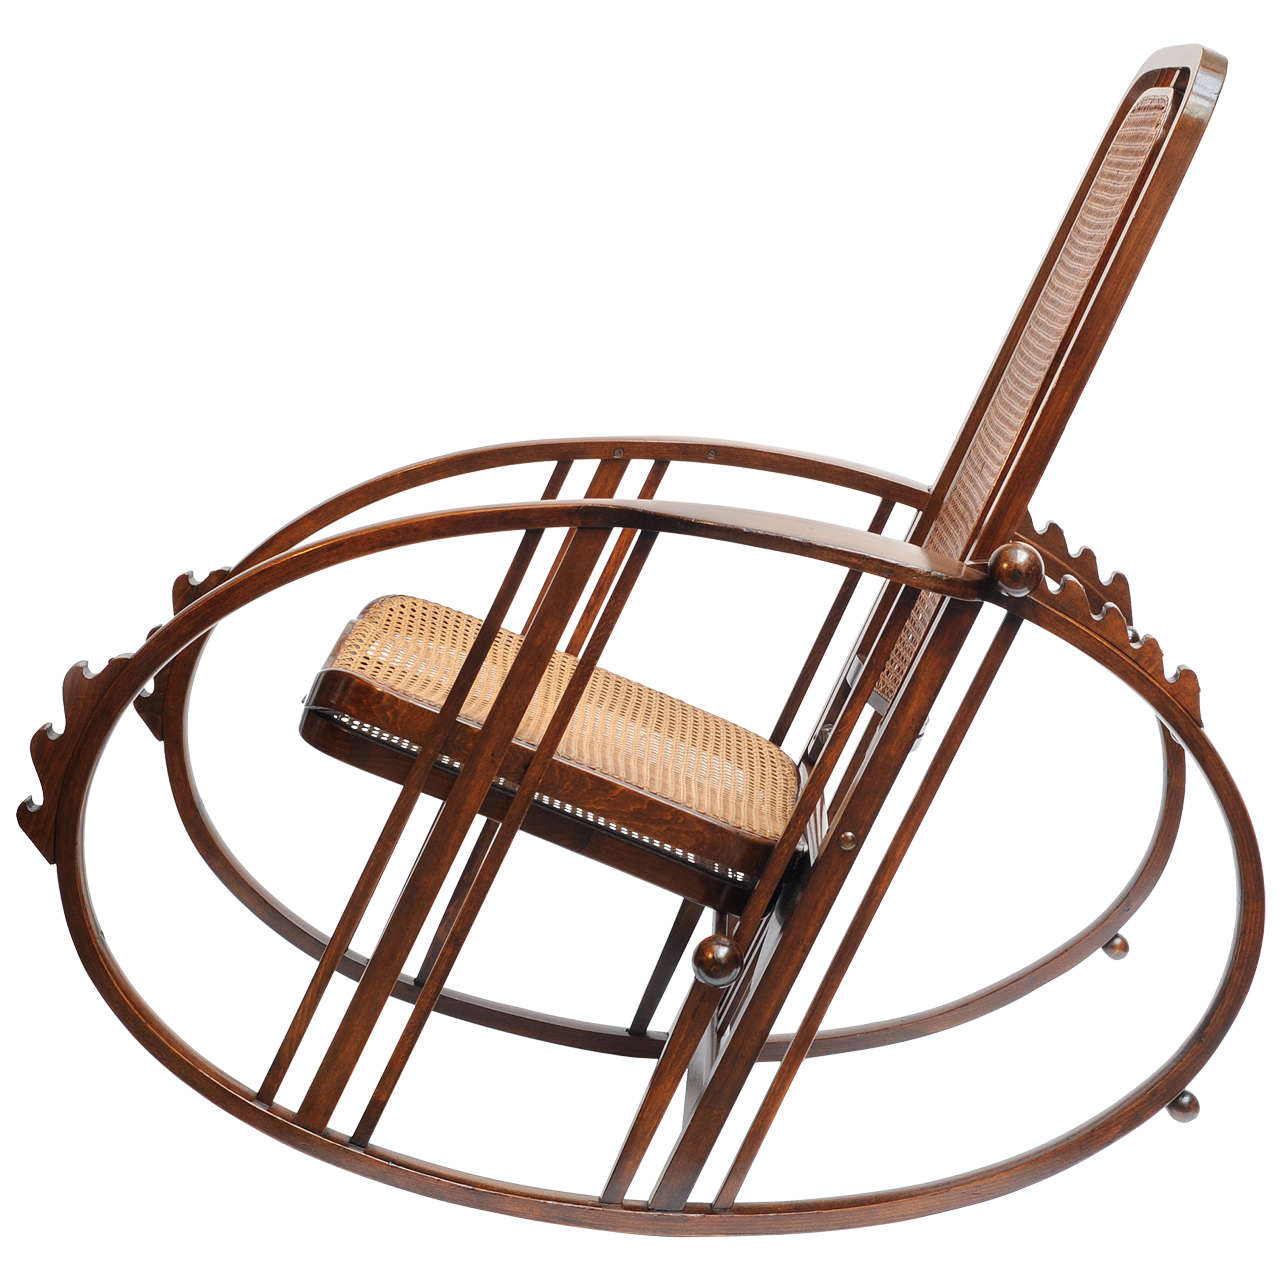  Rocking Chair with footrest by Antonio Volpe For Sale